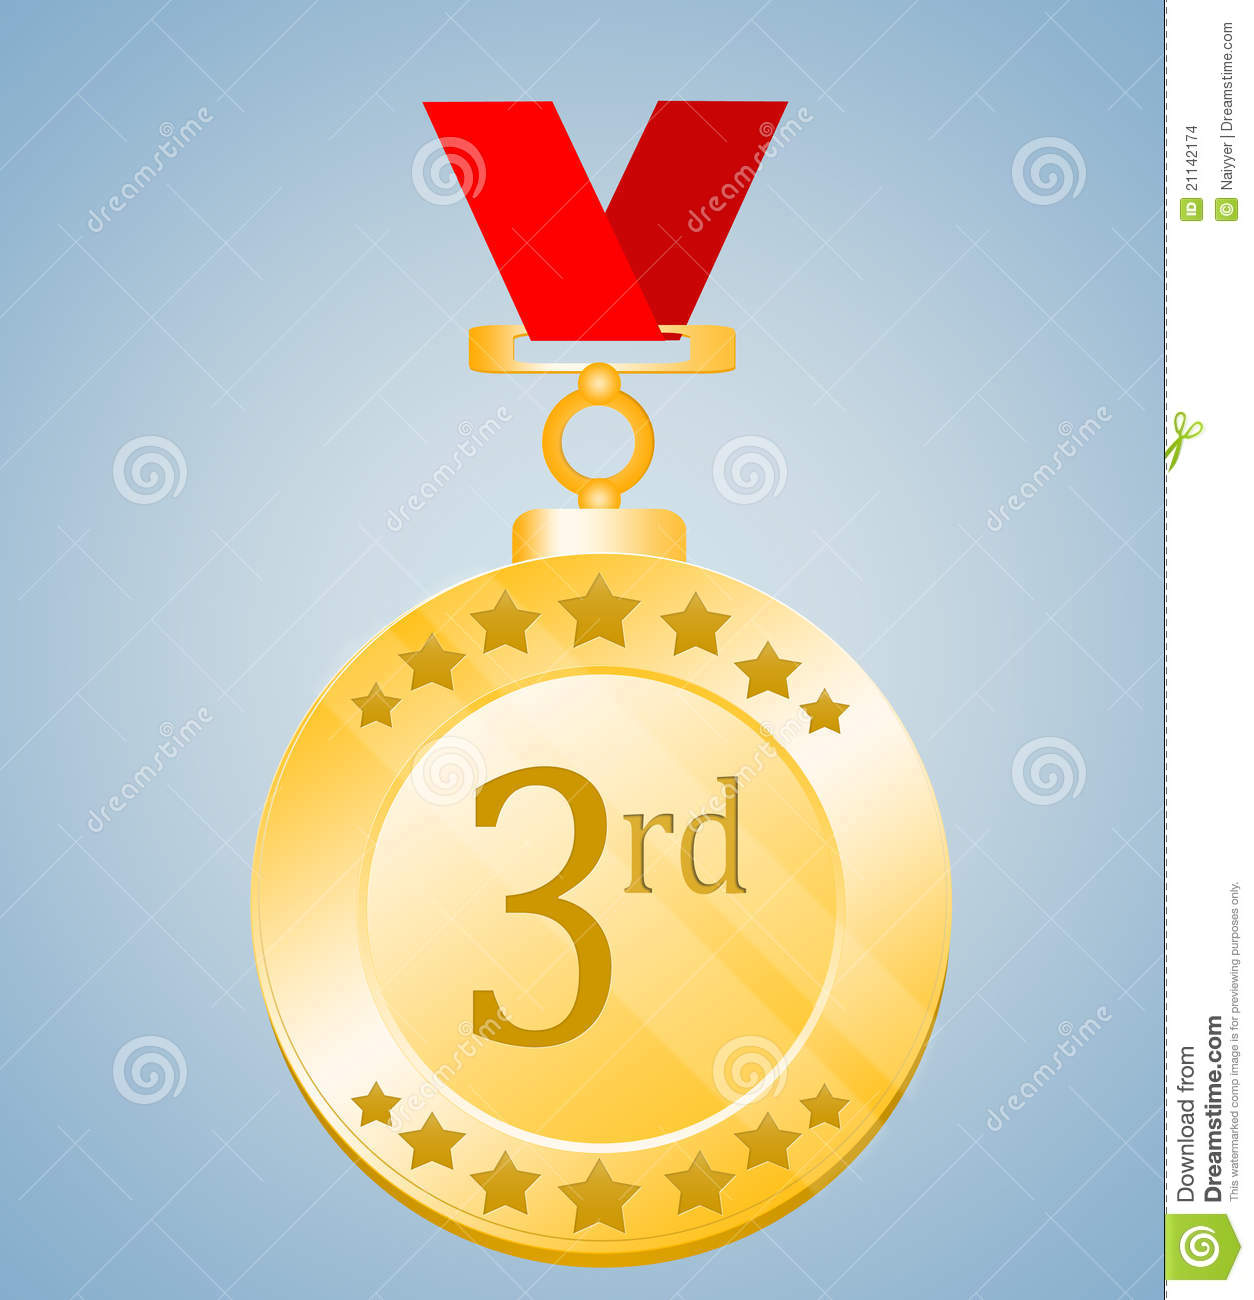 More Similar Stock Images Of   3rd Position Medal  